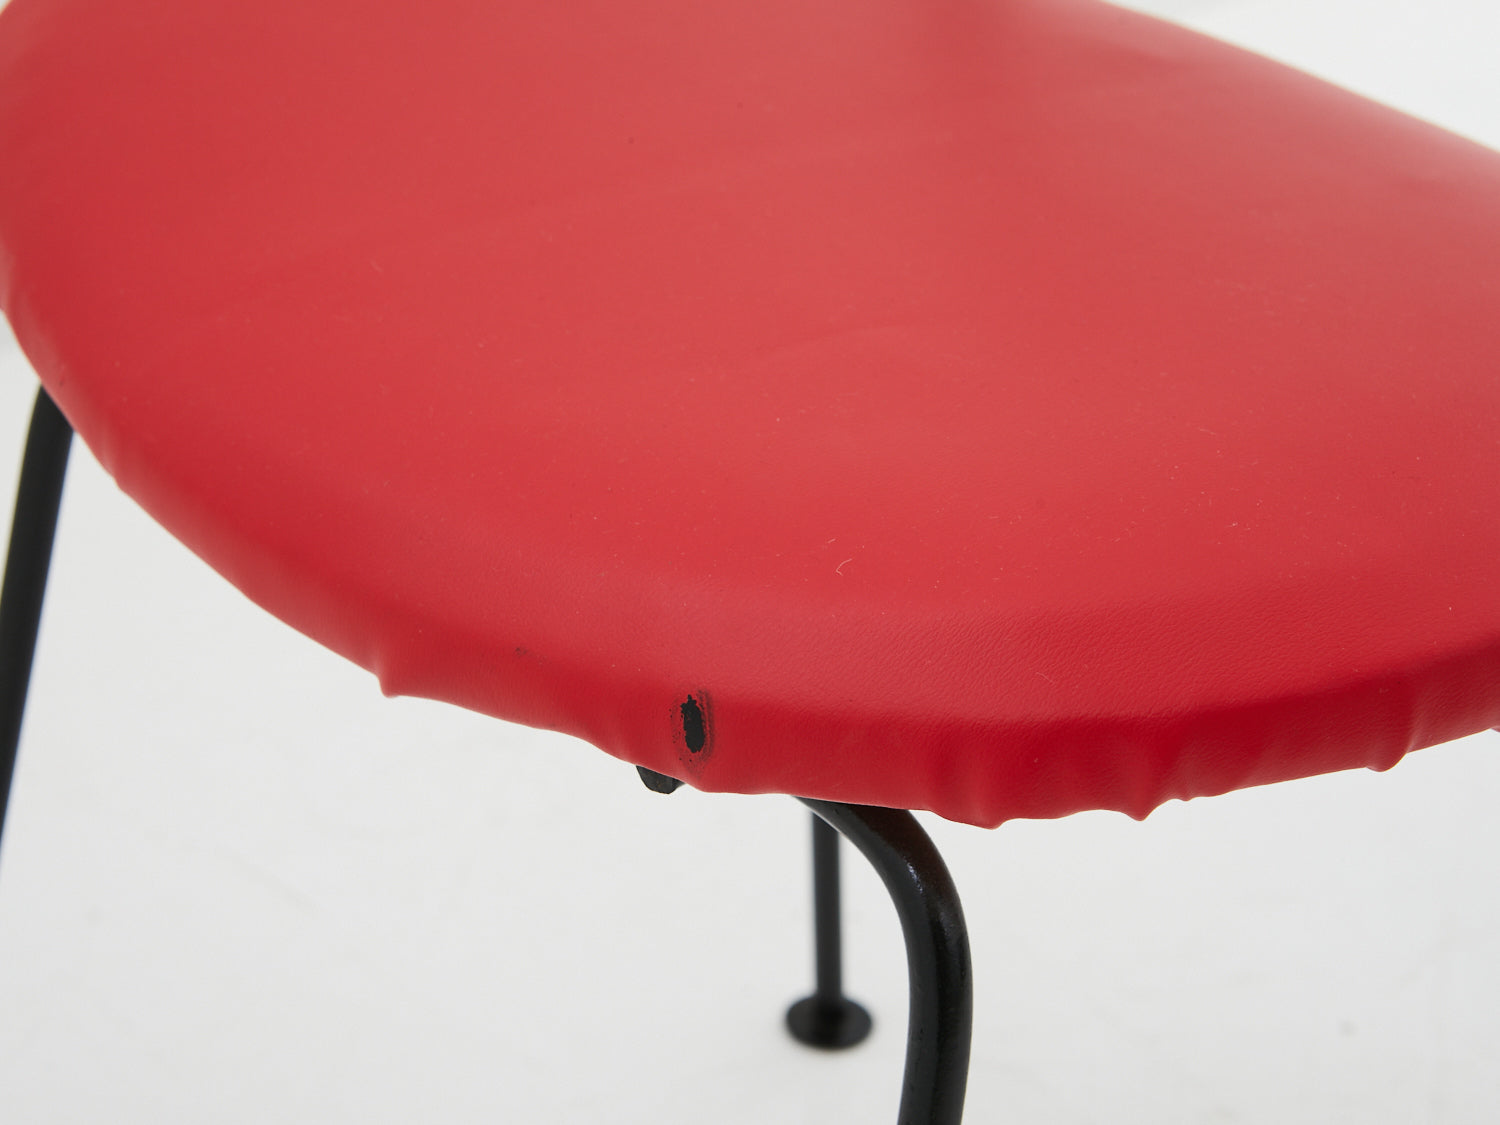 Close up of damage to red seat cushion on Arthur Umanoff dining chair